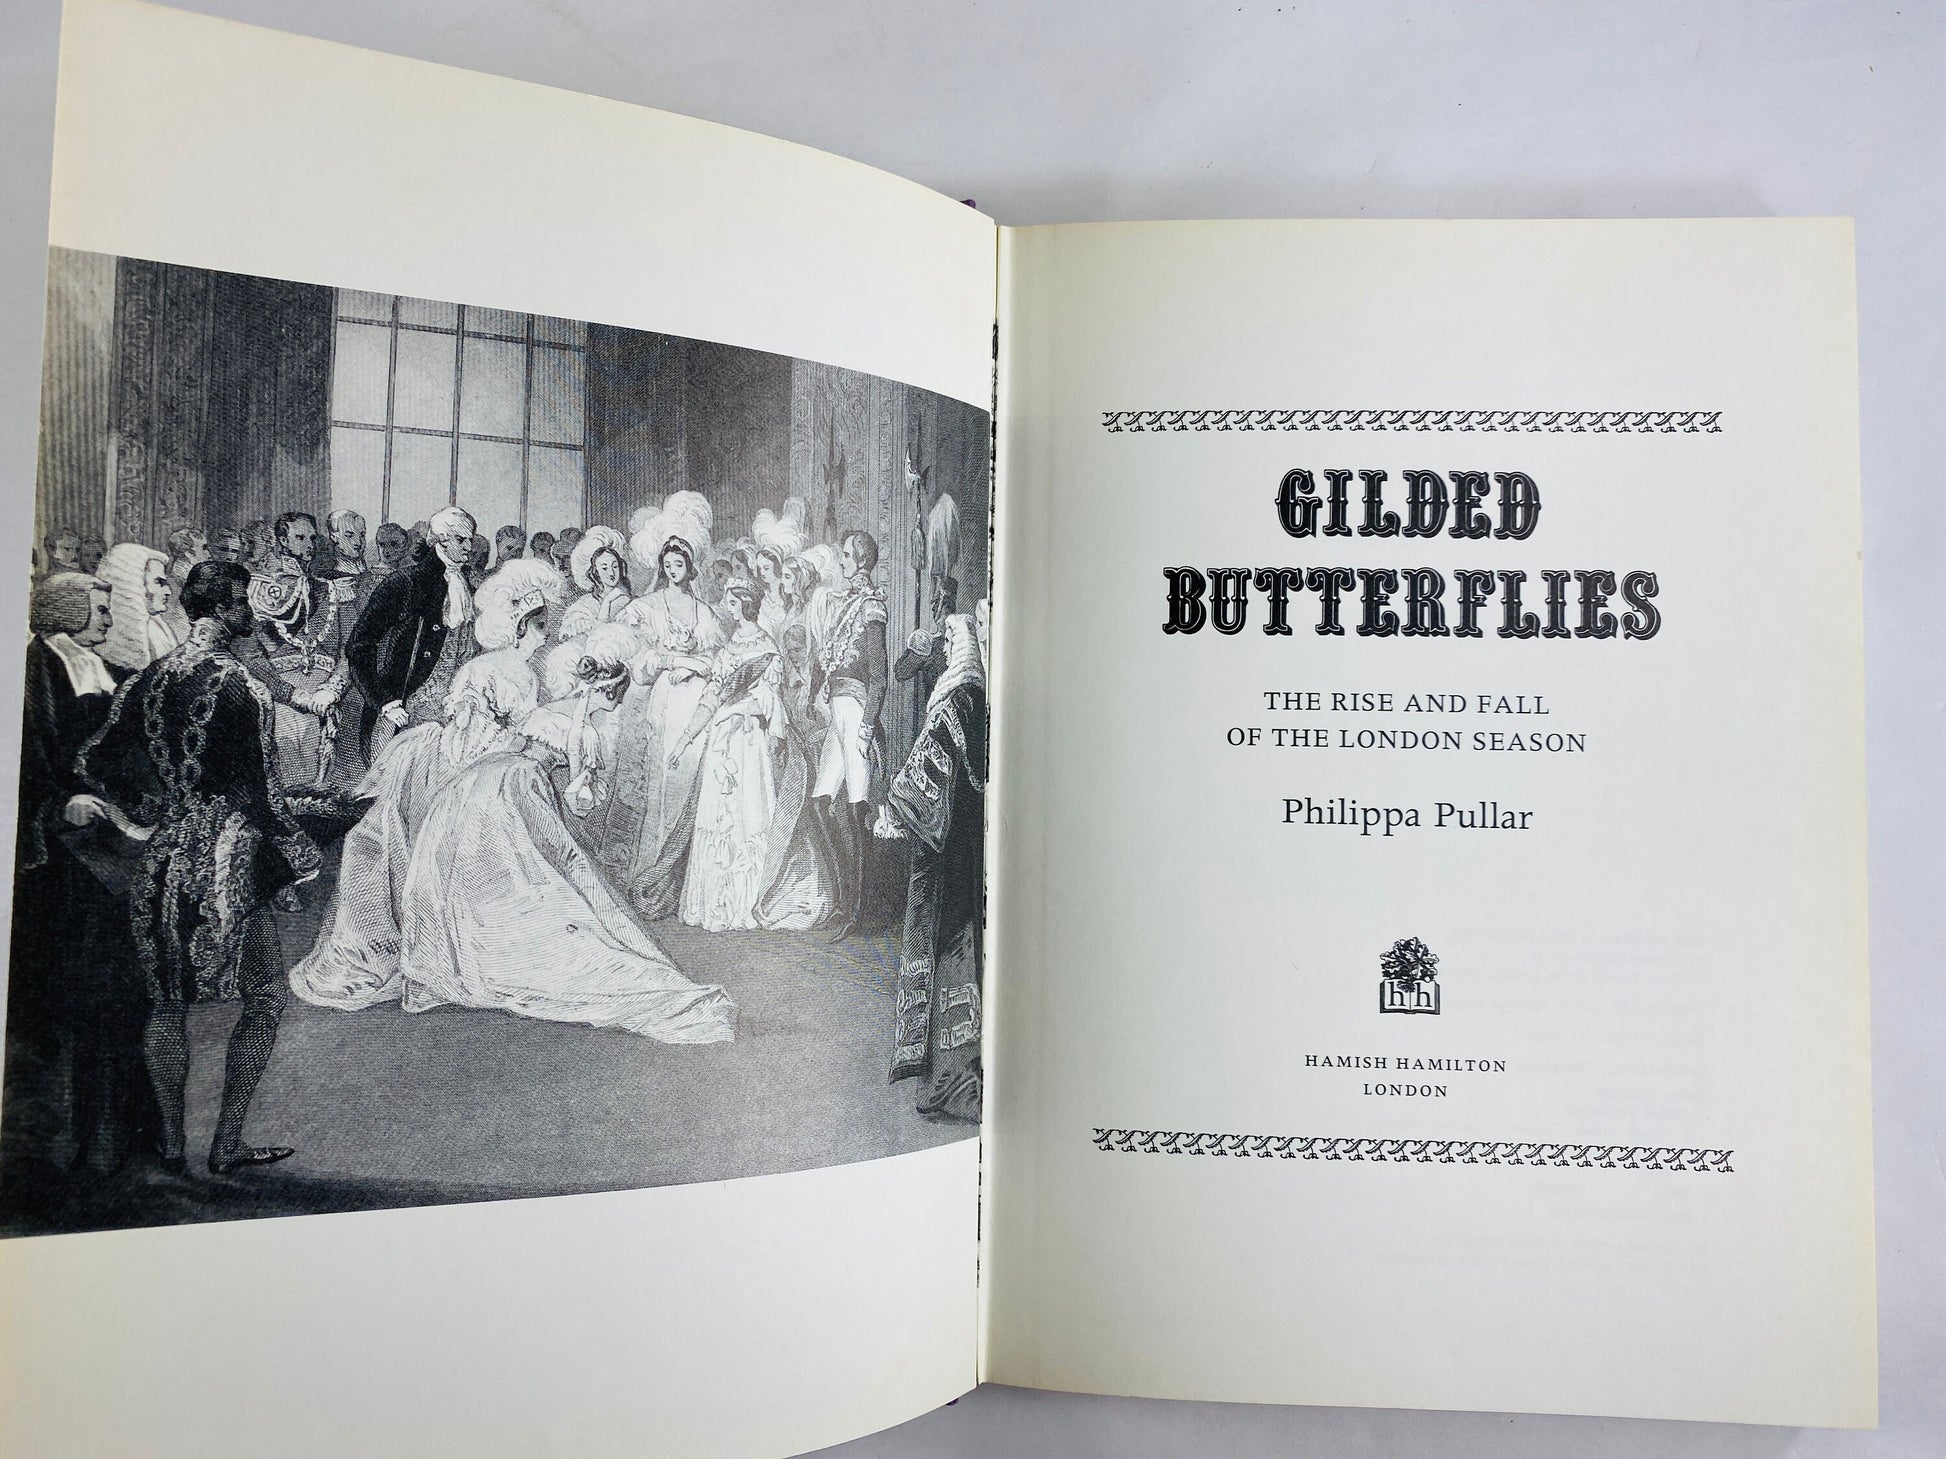 Gilded Butterflies vintage book about the Rise and Fall of the London Season by Philippa Pullar circa 1978